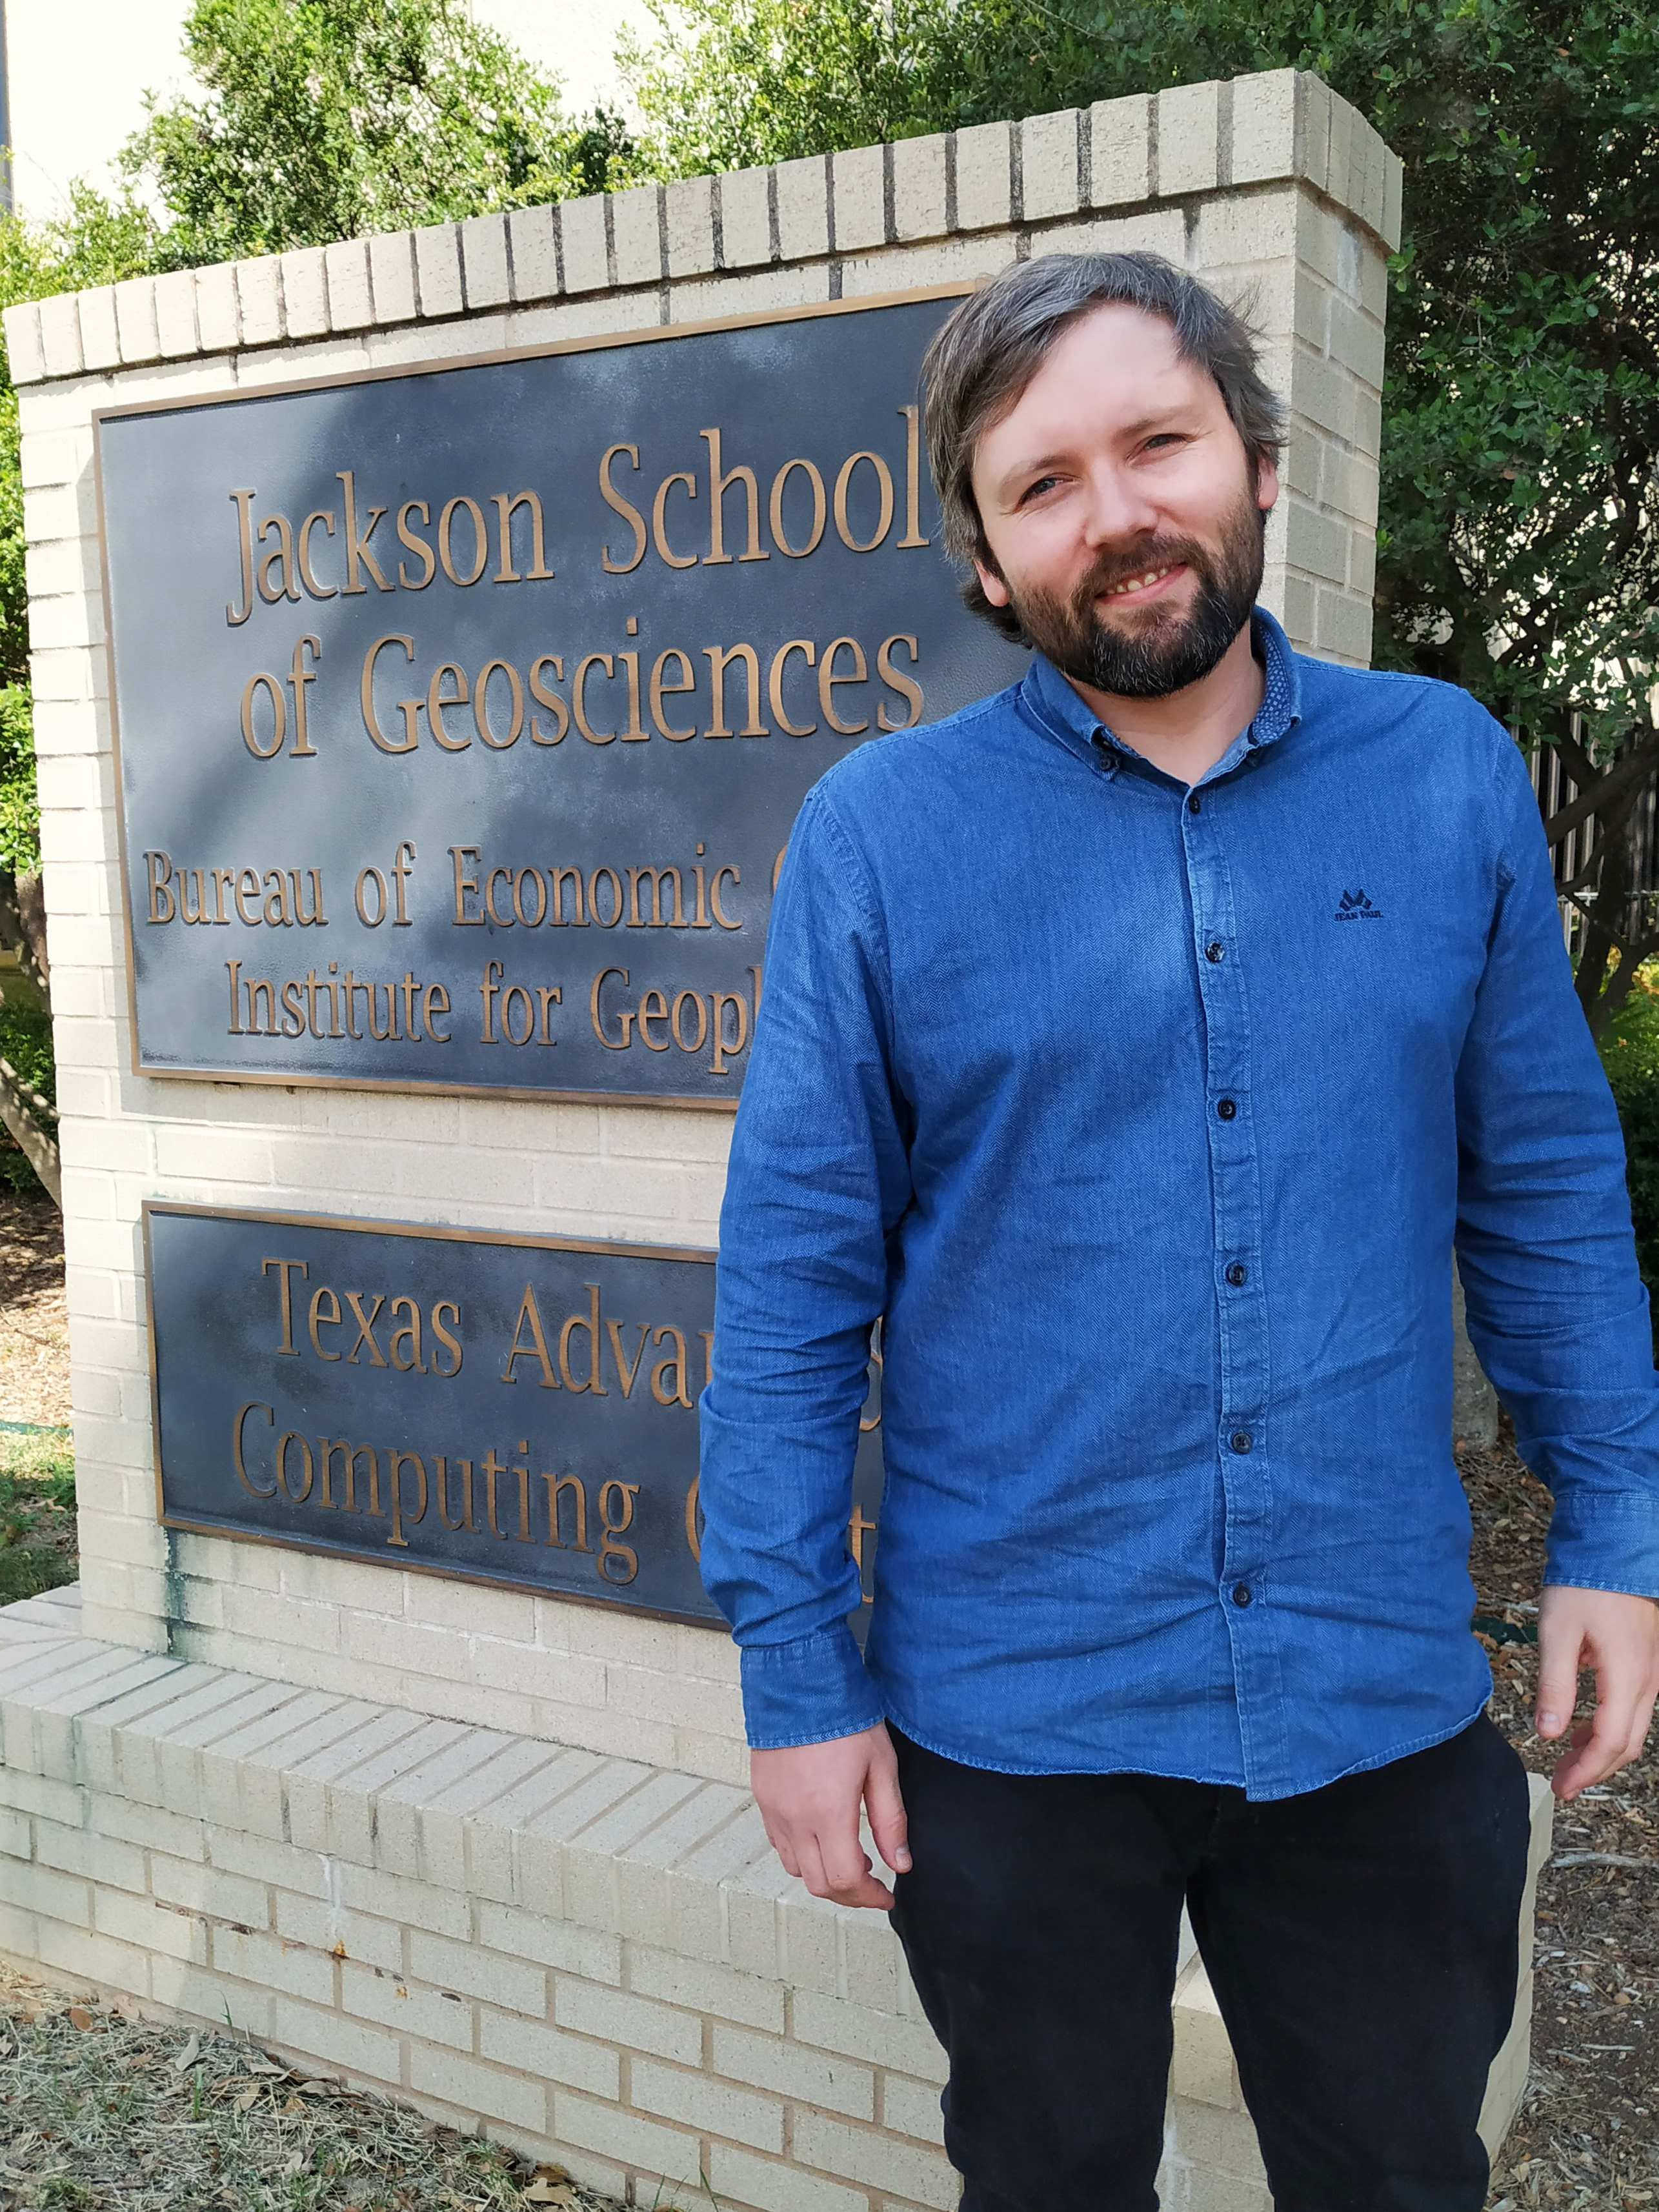 Kristian stands in front of the Jackson School of Geosciences/Bureau of Economic Geology sign in front of the building